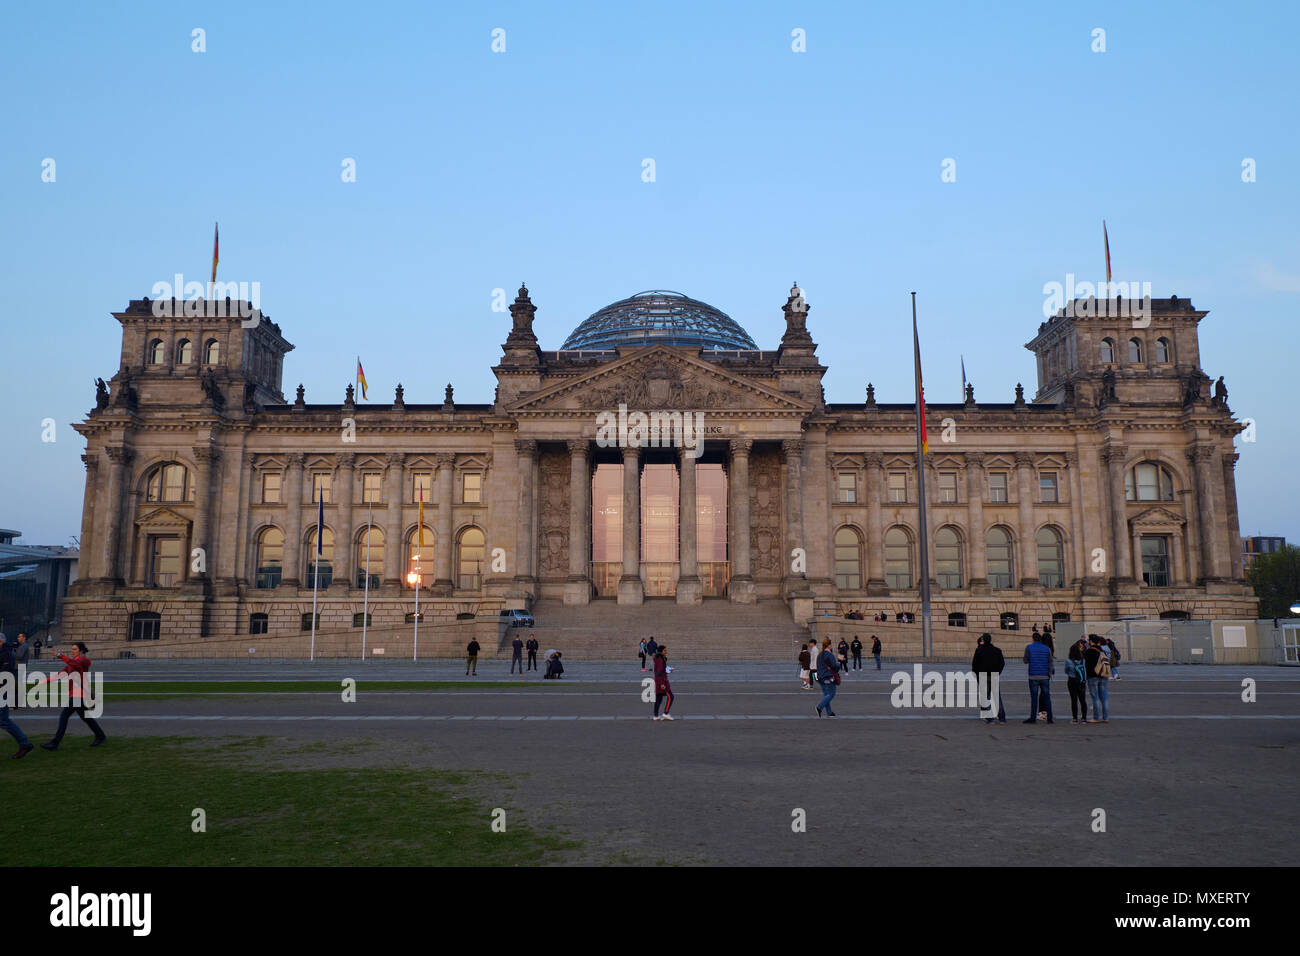 Berlin, Germany - April 14, 2018: Front view of Reichstag building with walking tourists on the foreground at sunset Stock Photo